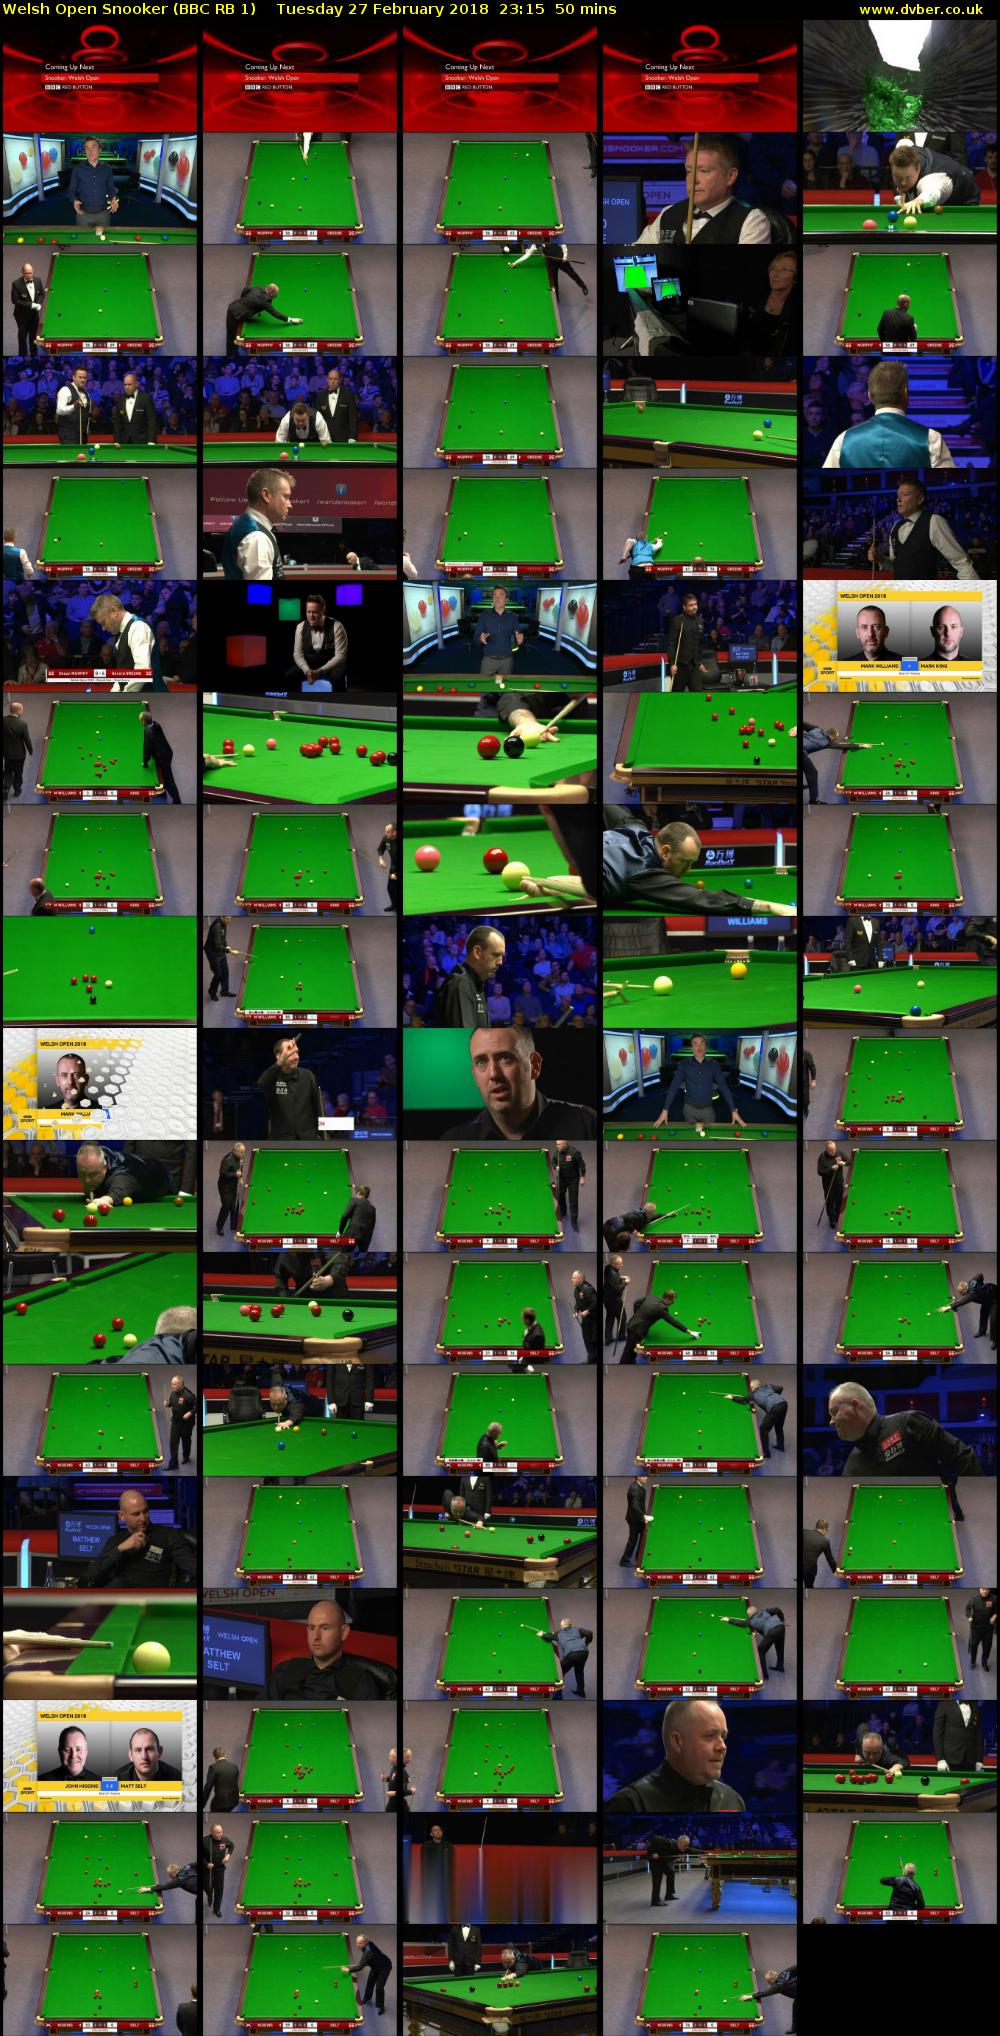 Welsh Open Snooker (BBC RB 1) Tuesday 27 February 2018 23:15 - 00:05